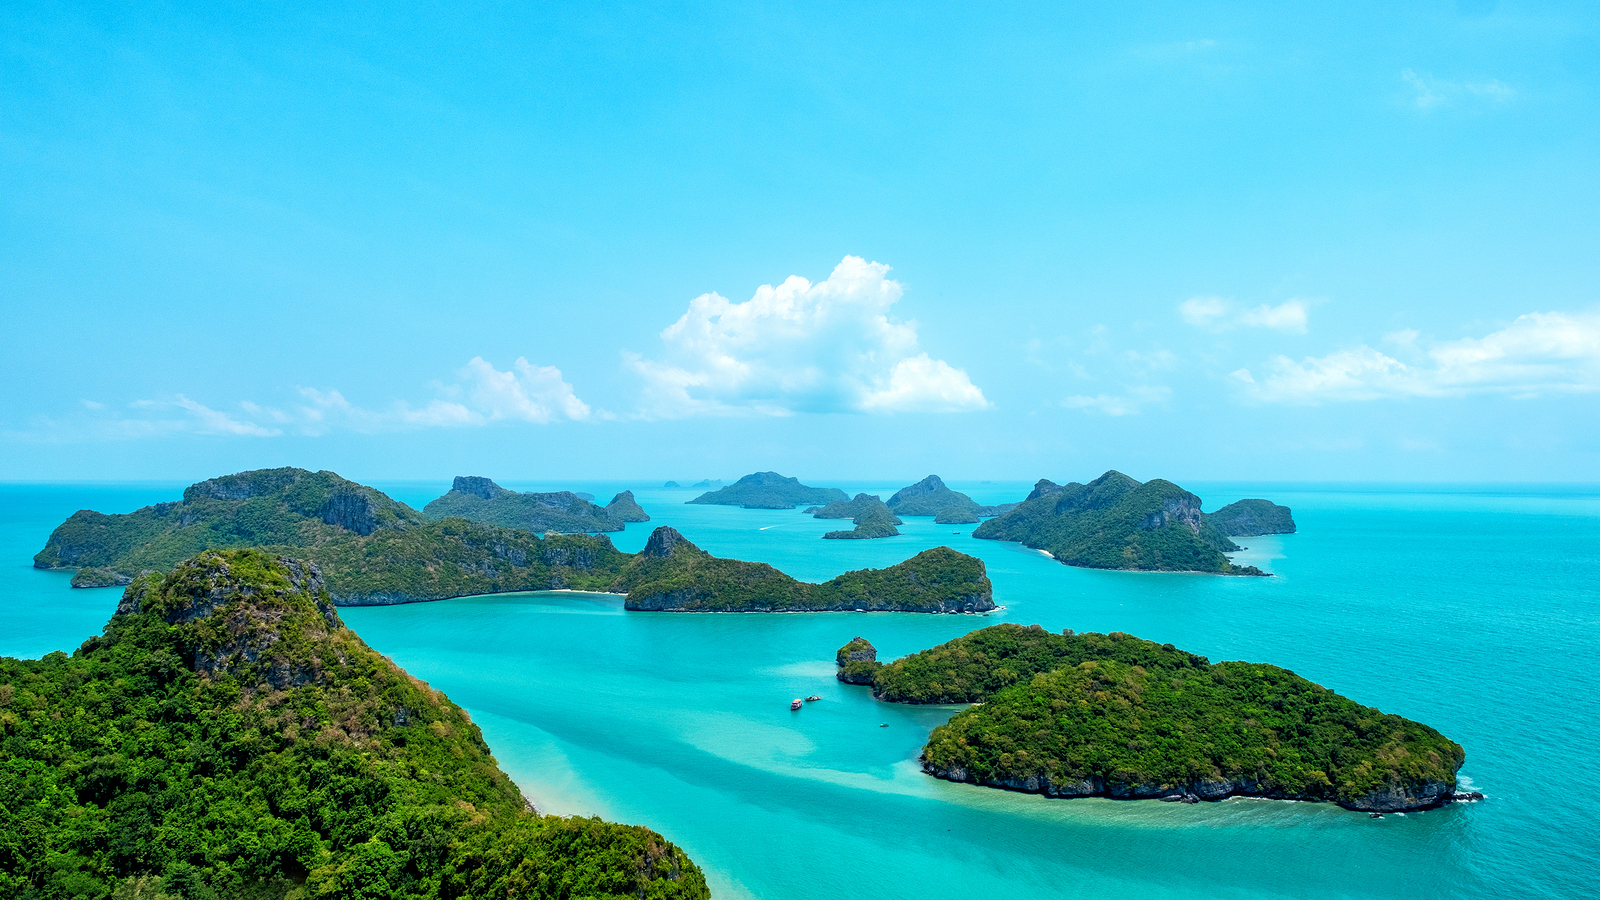 SURAT THANI AS "CITY OF 100 ISLANDS" - Go Places™ Thailand